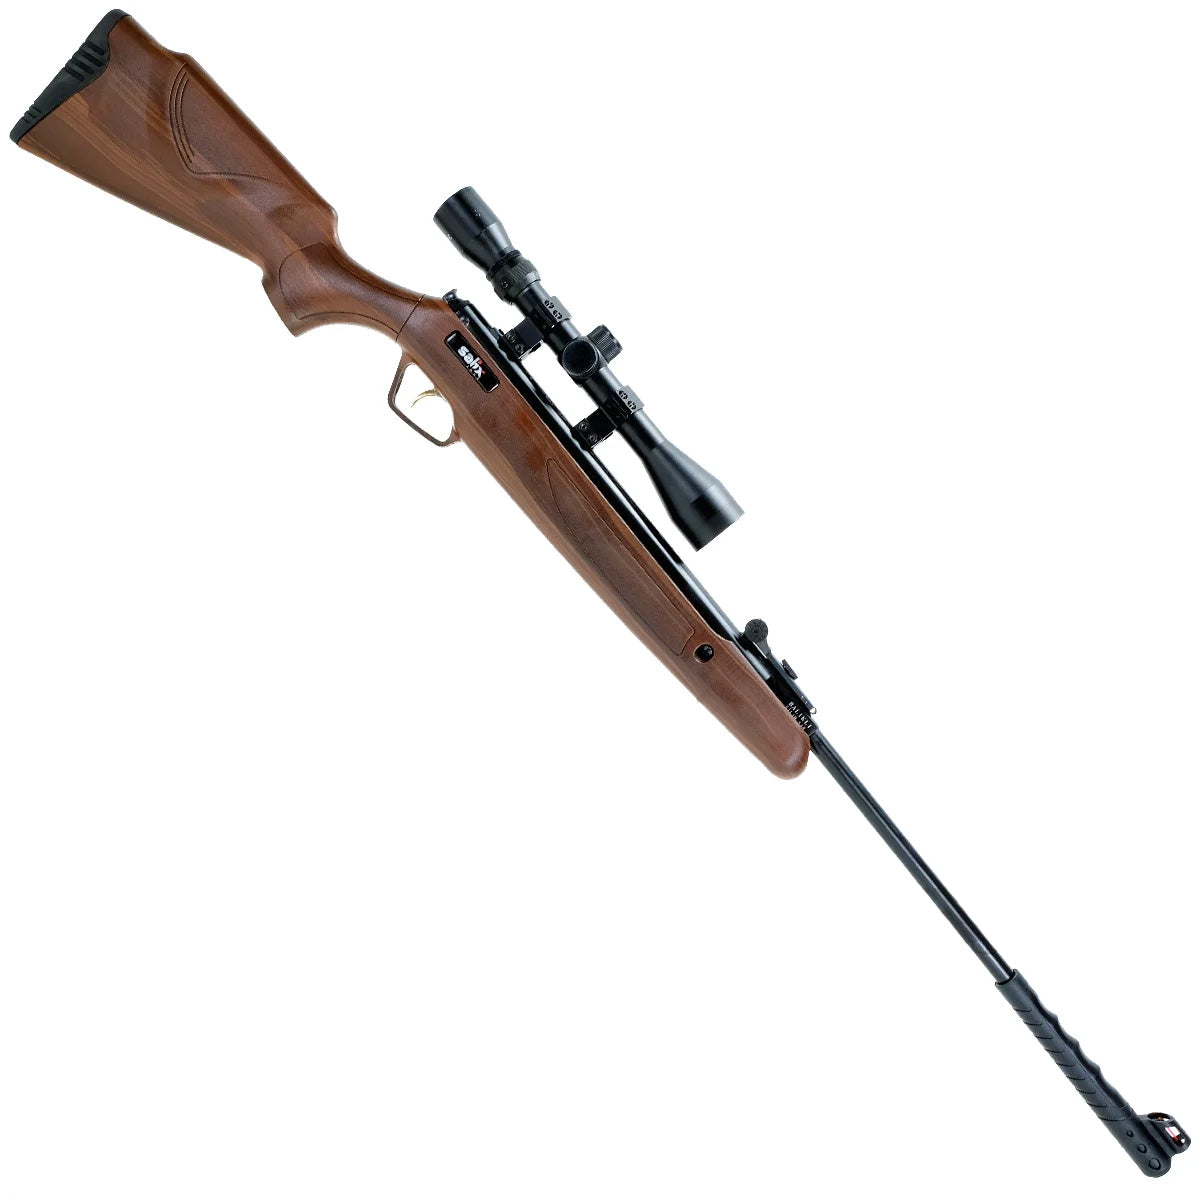 SALIX, TRIMEX ARMS TX01 BREAK BARREL SPRING AIR RIFLE WITH SYNTHETIC STOCK .177